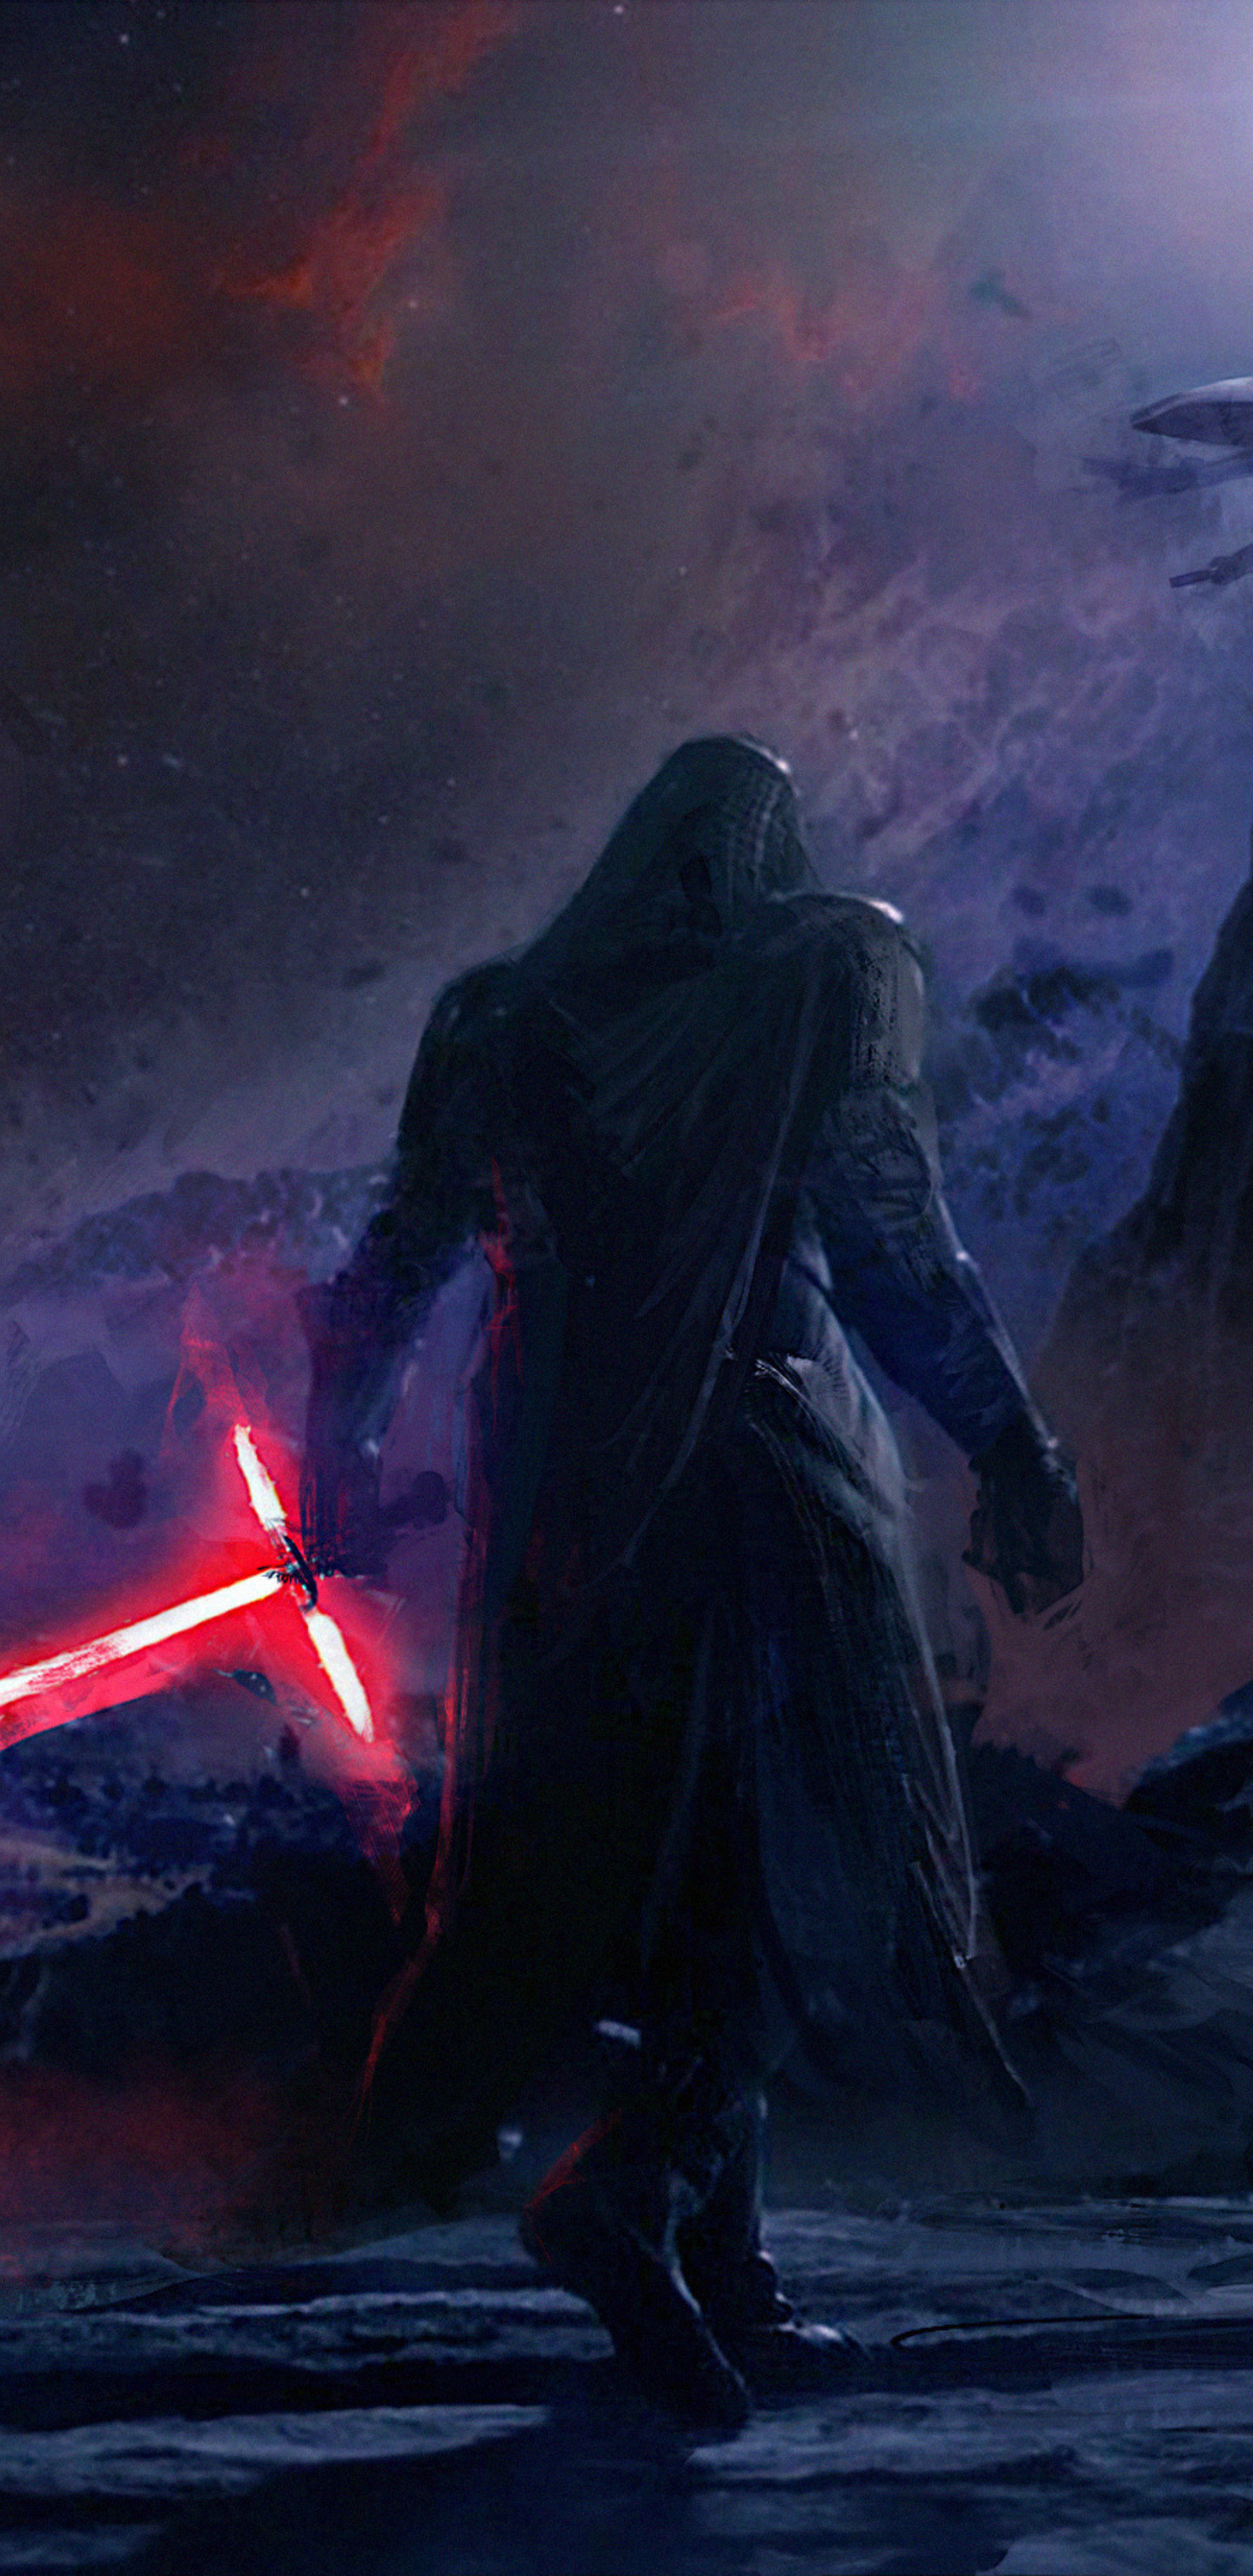 1440x2960 3840x2160 Kylo Ren ready to fight - Star Wars: The Force Awakens wallpaper